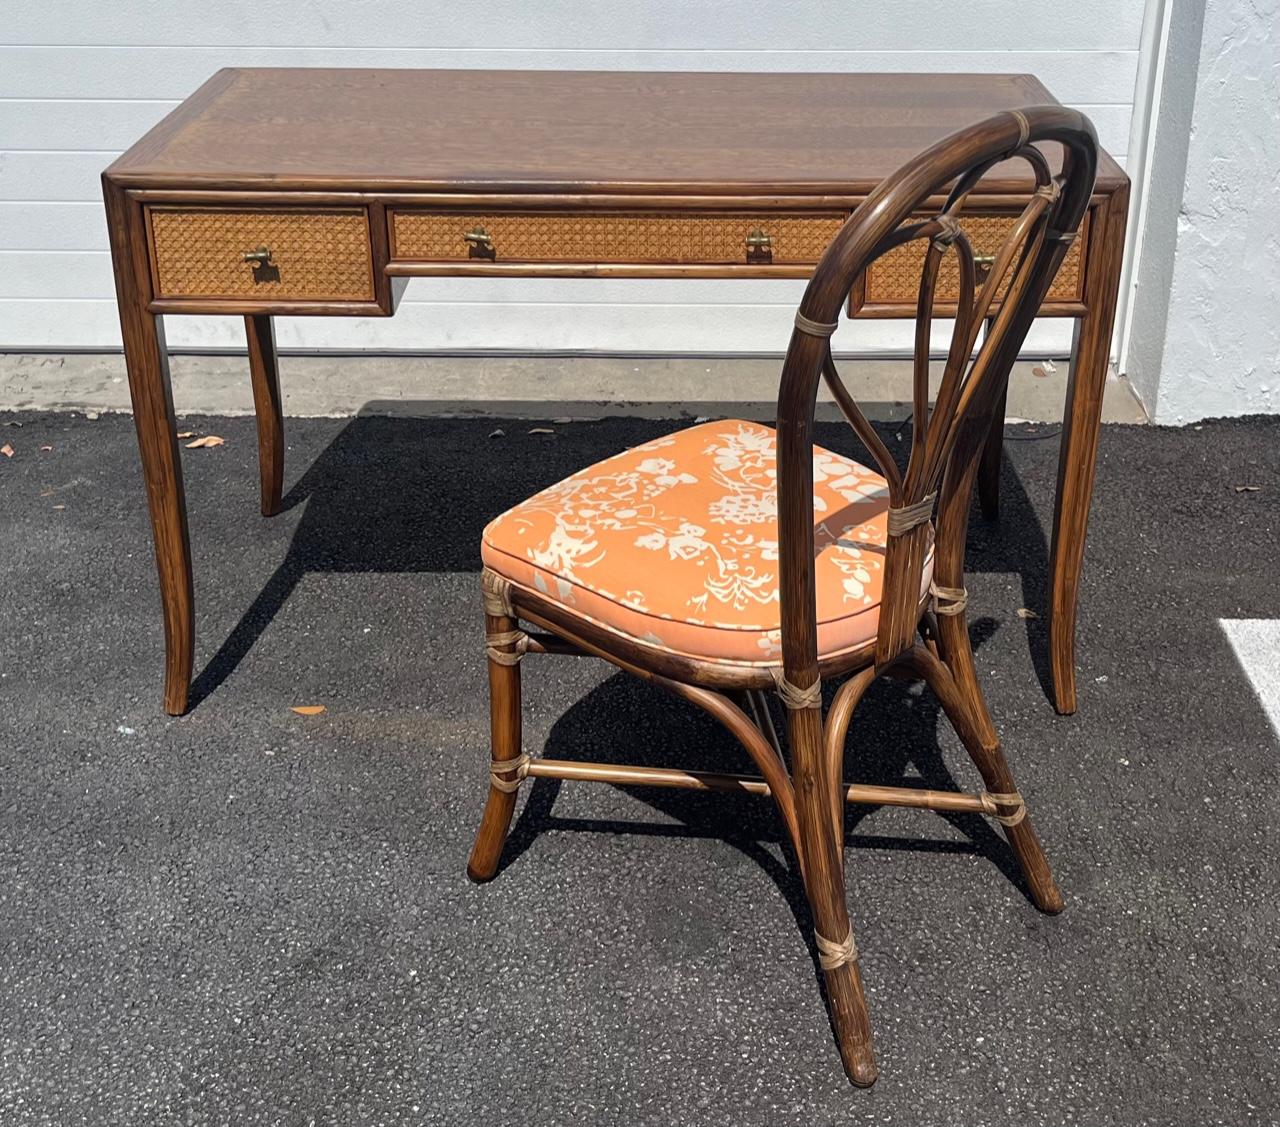 Fabulous McGuire caned writing desk. Measures: 48